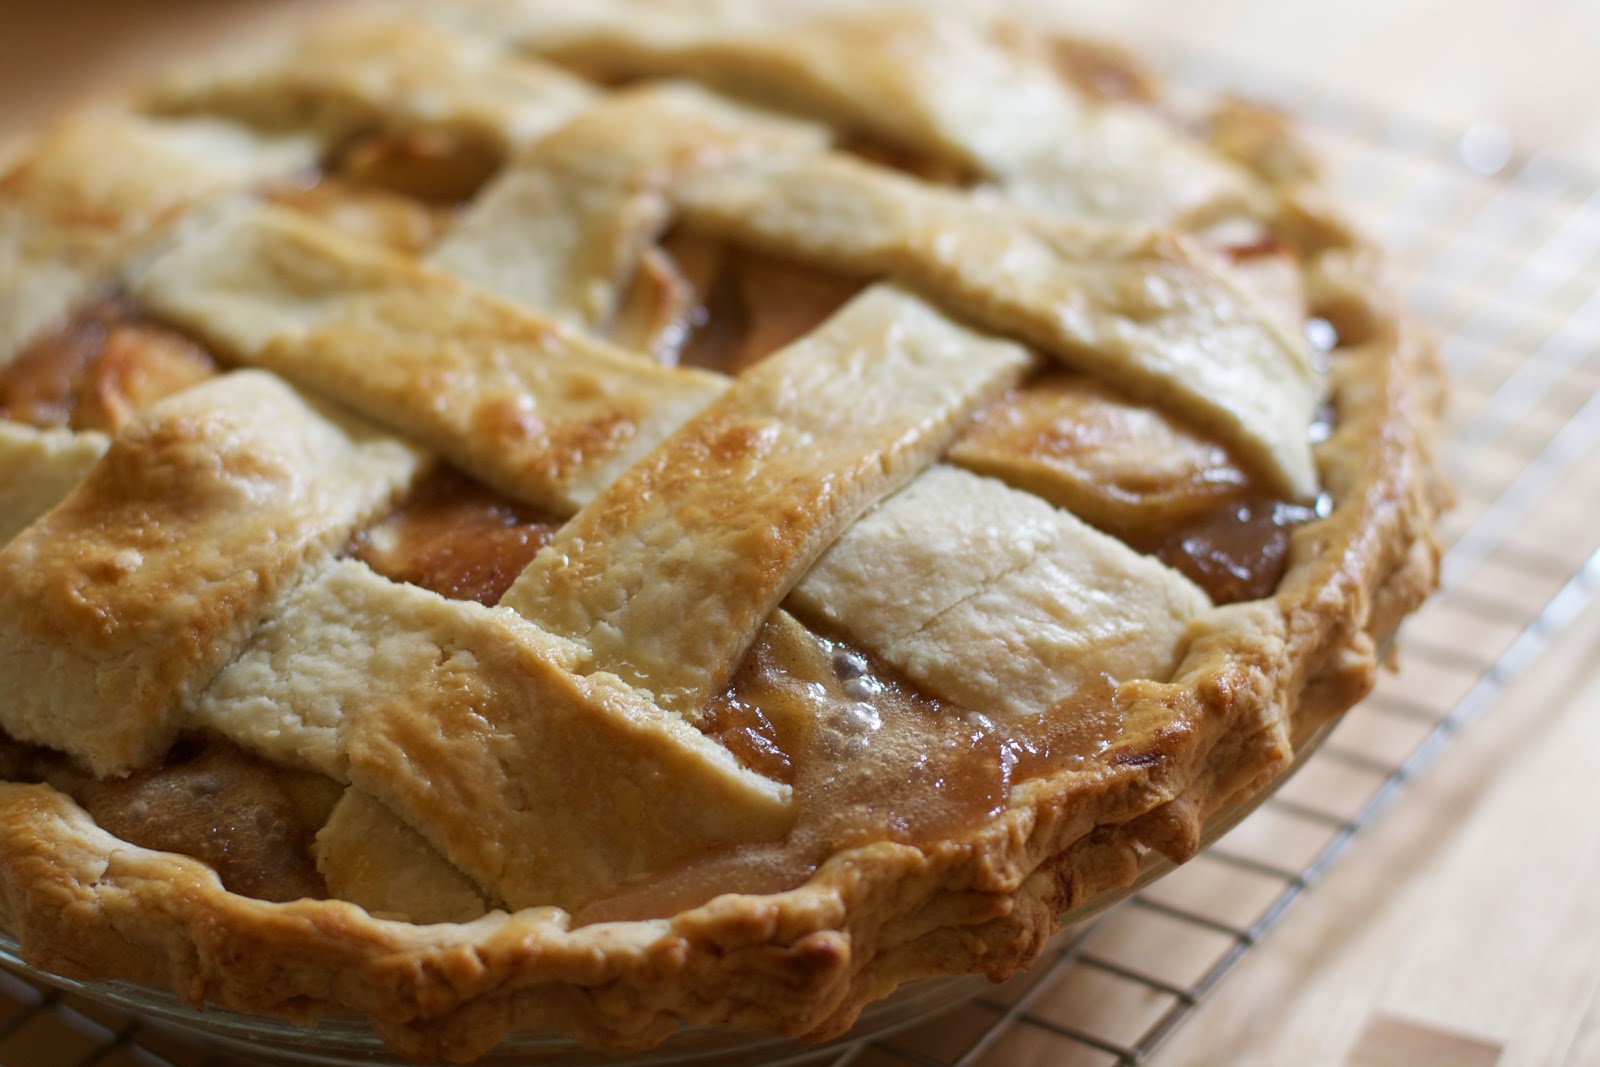 Looking to make apple pie this year? Here’s a healthy option to try ...